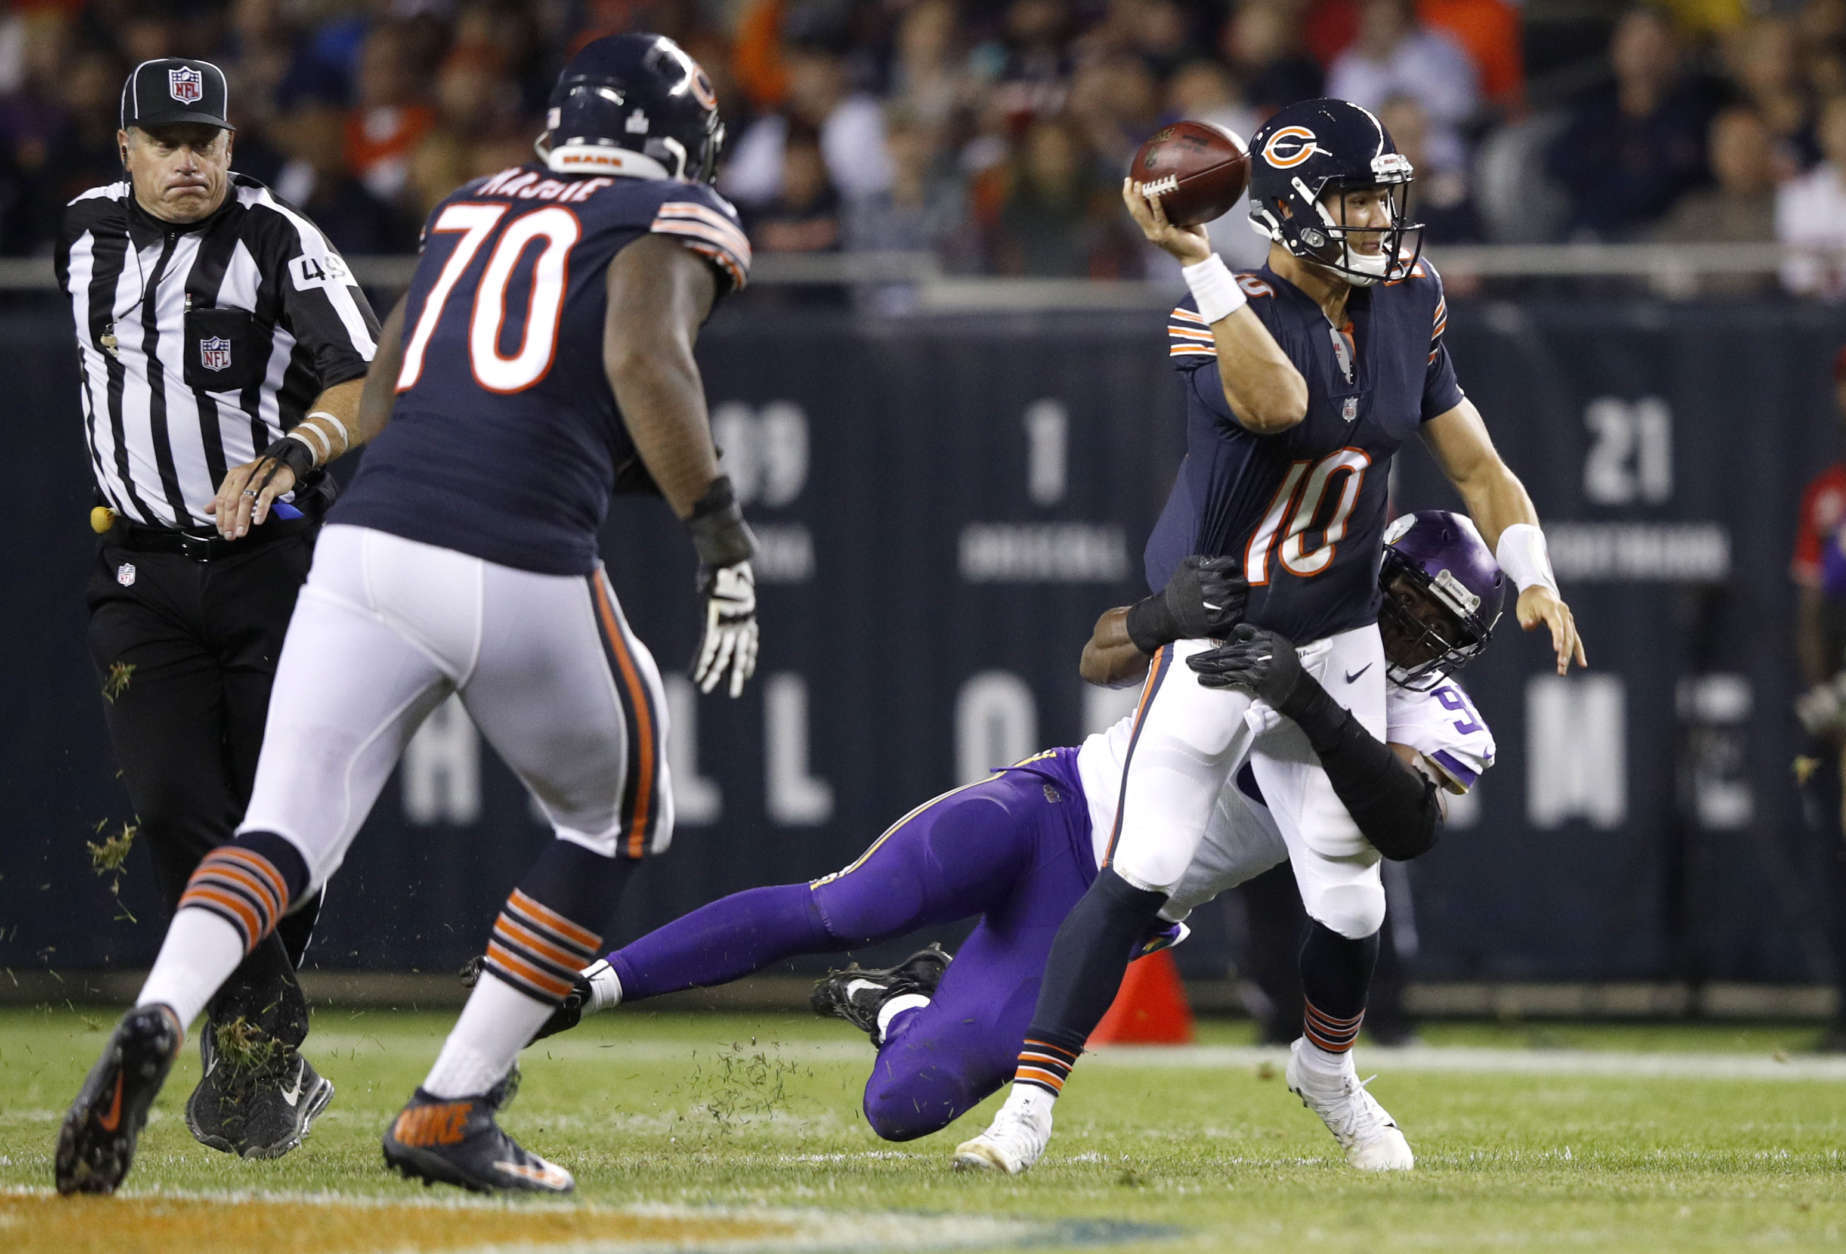 CHICAGO, IL - OCTOBER 09:  Quarterback Mitchell Trubisky #10 of the Chicago Bears is hit by  Danielle Hunter #99 of the Minnesota Vikings in the third quarter at Soldier Field on October 9, 2017 in Chicago, Illinois.  (Photo by Joe Robbins/Getty Images)